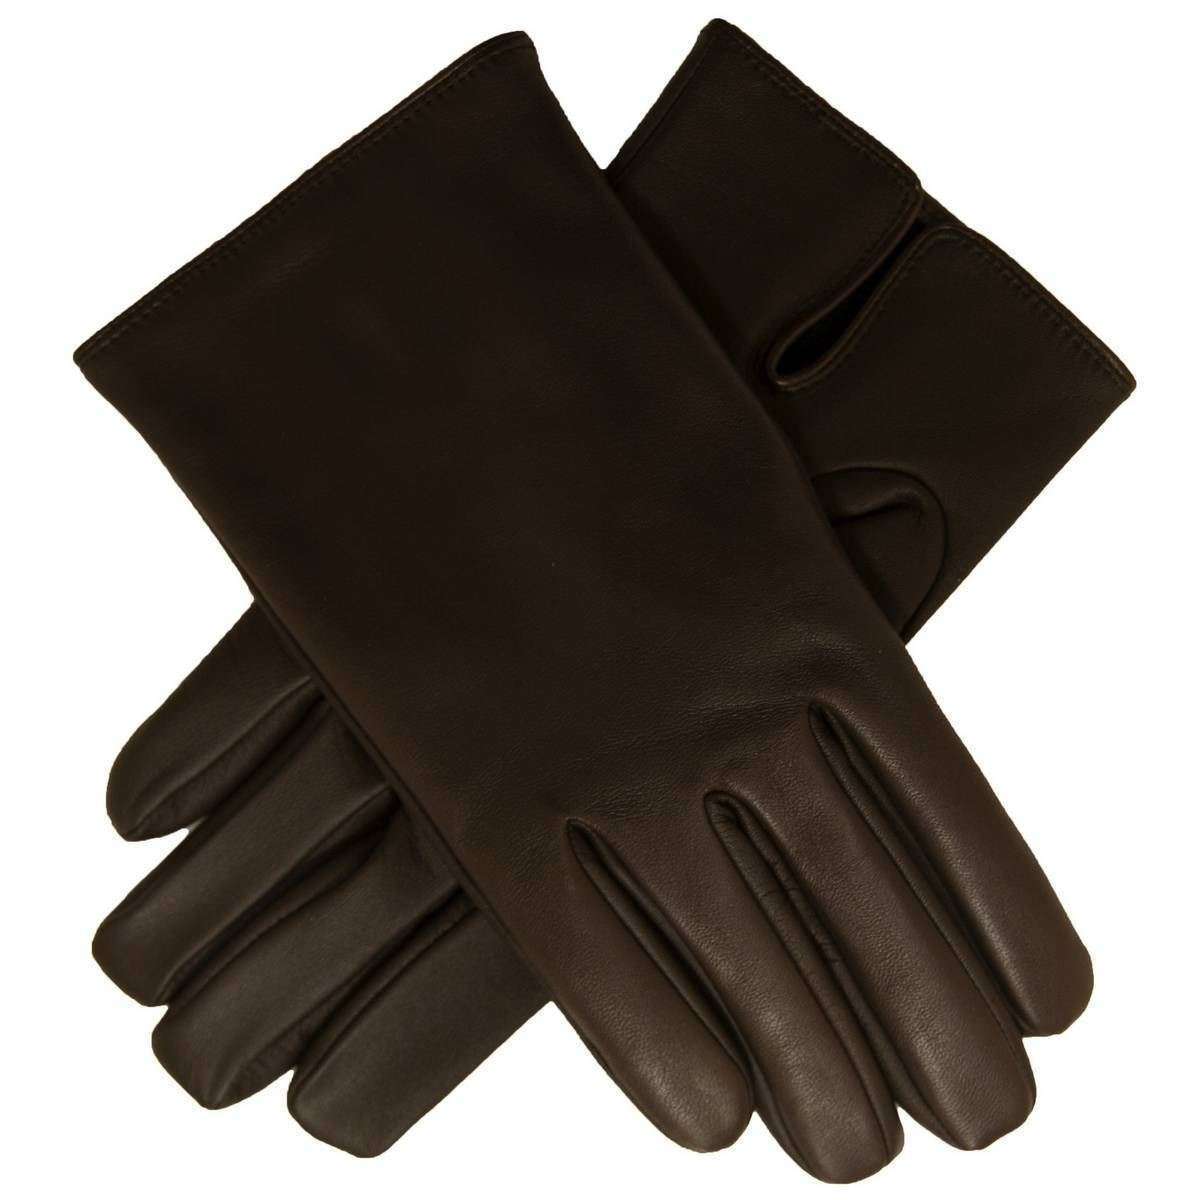 Dents Touchscreen Cashmere Lined Gloves - Brown/Beige